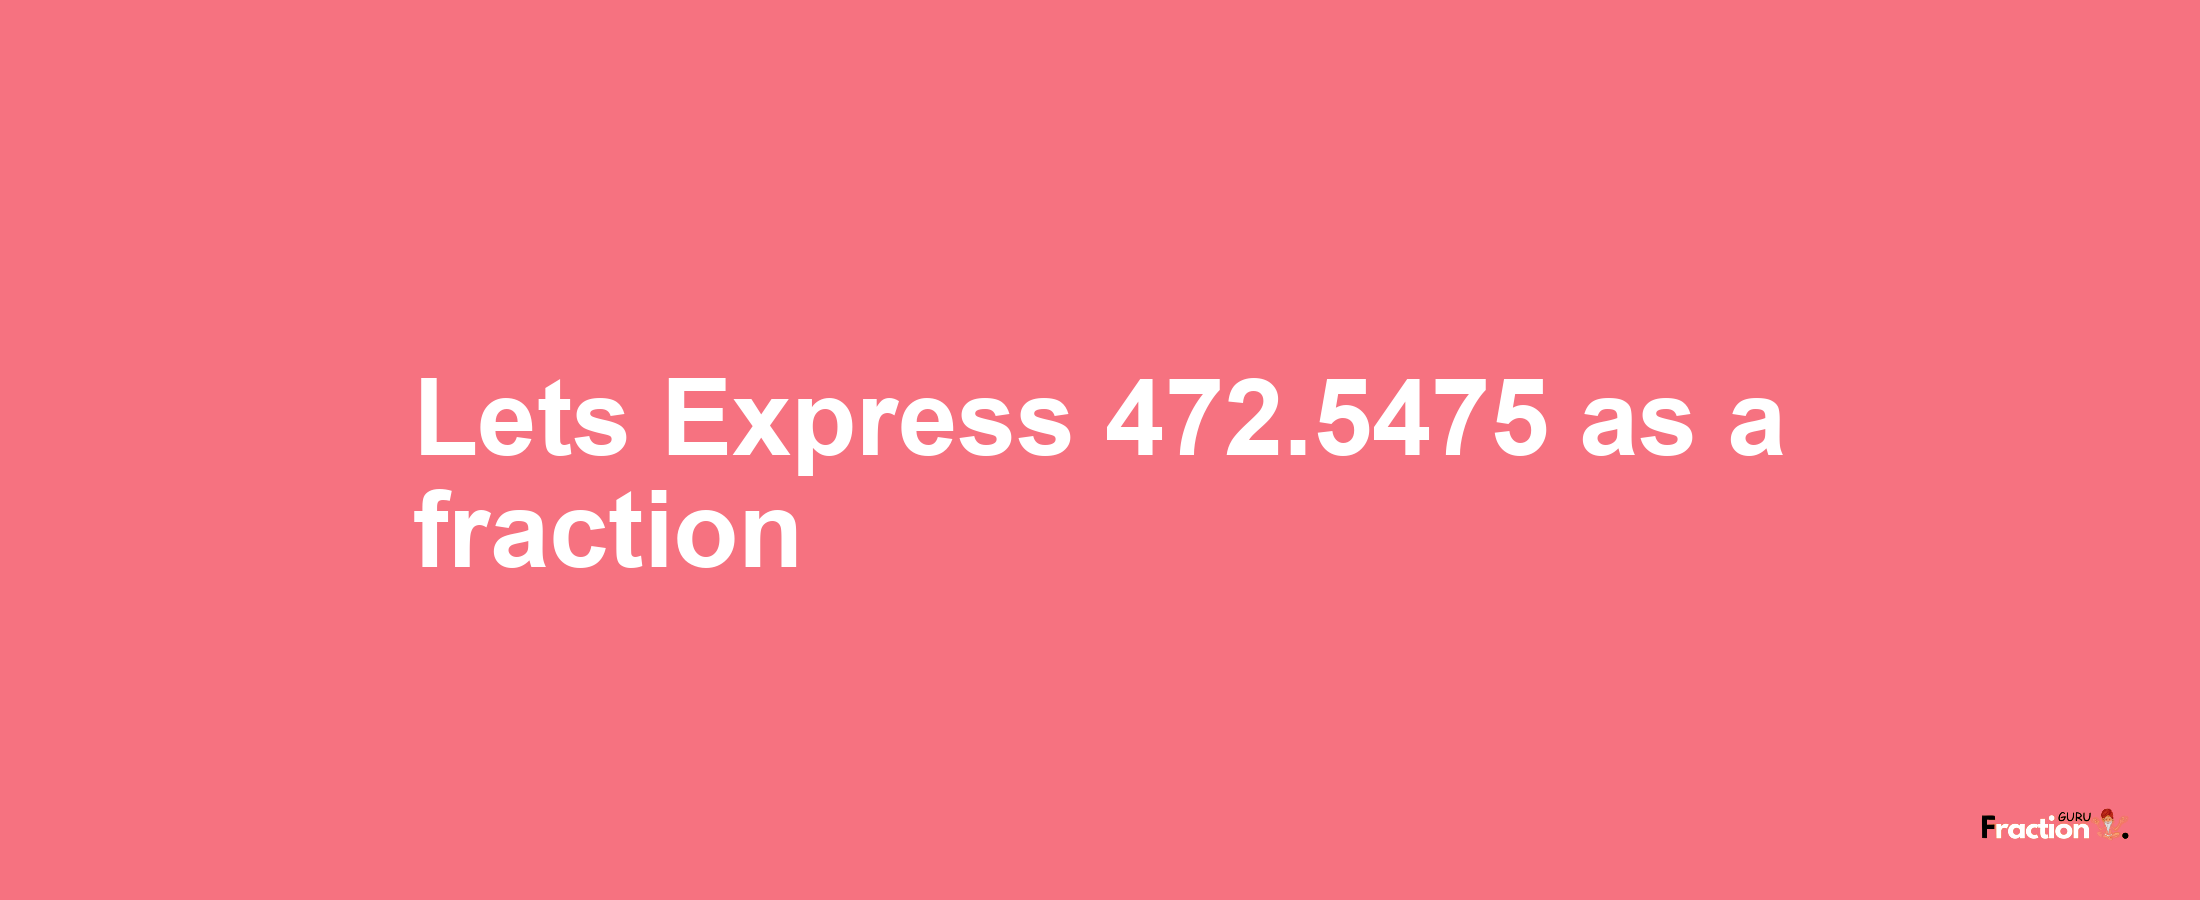 Lets Express 472.5475 as afraction